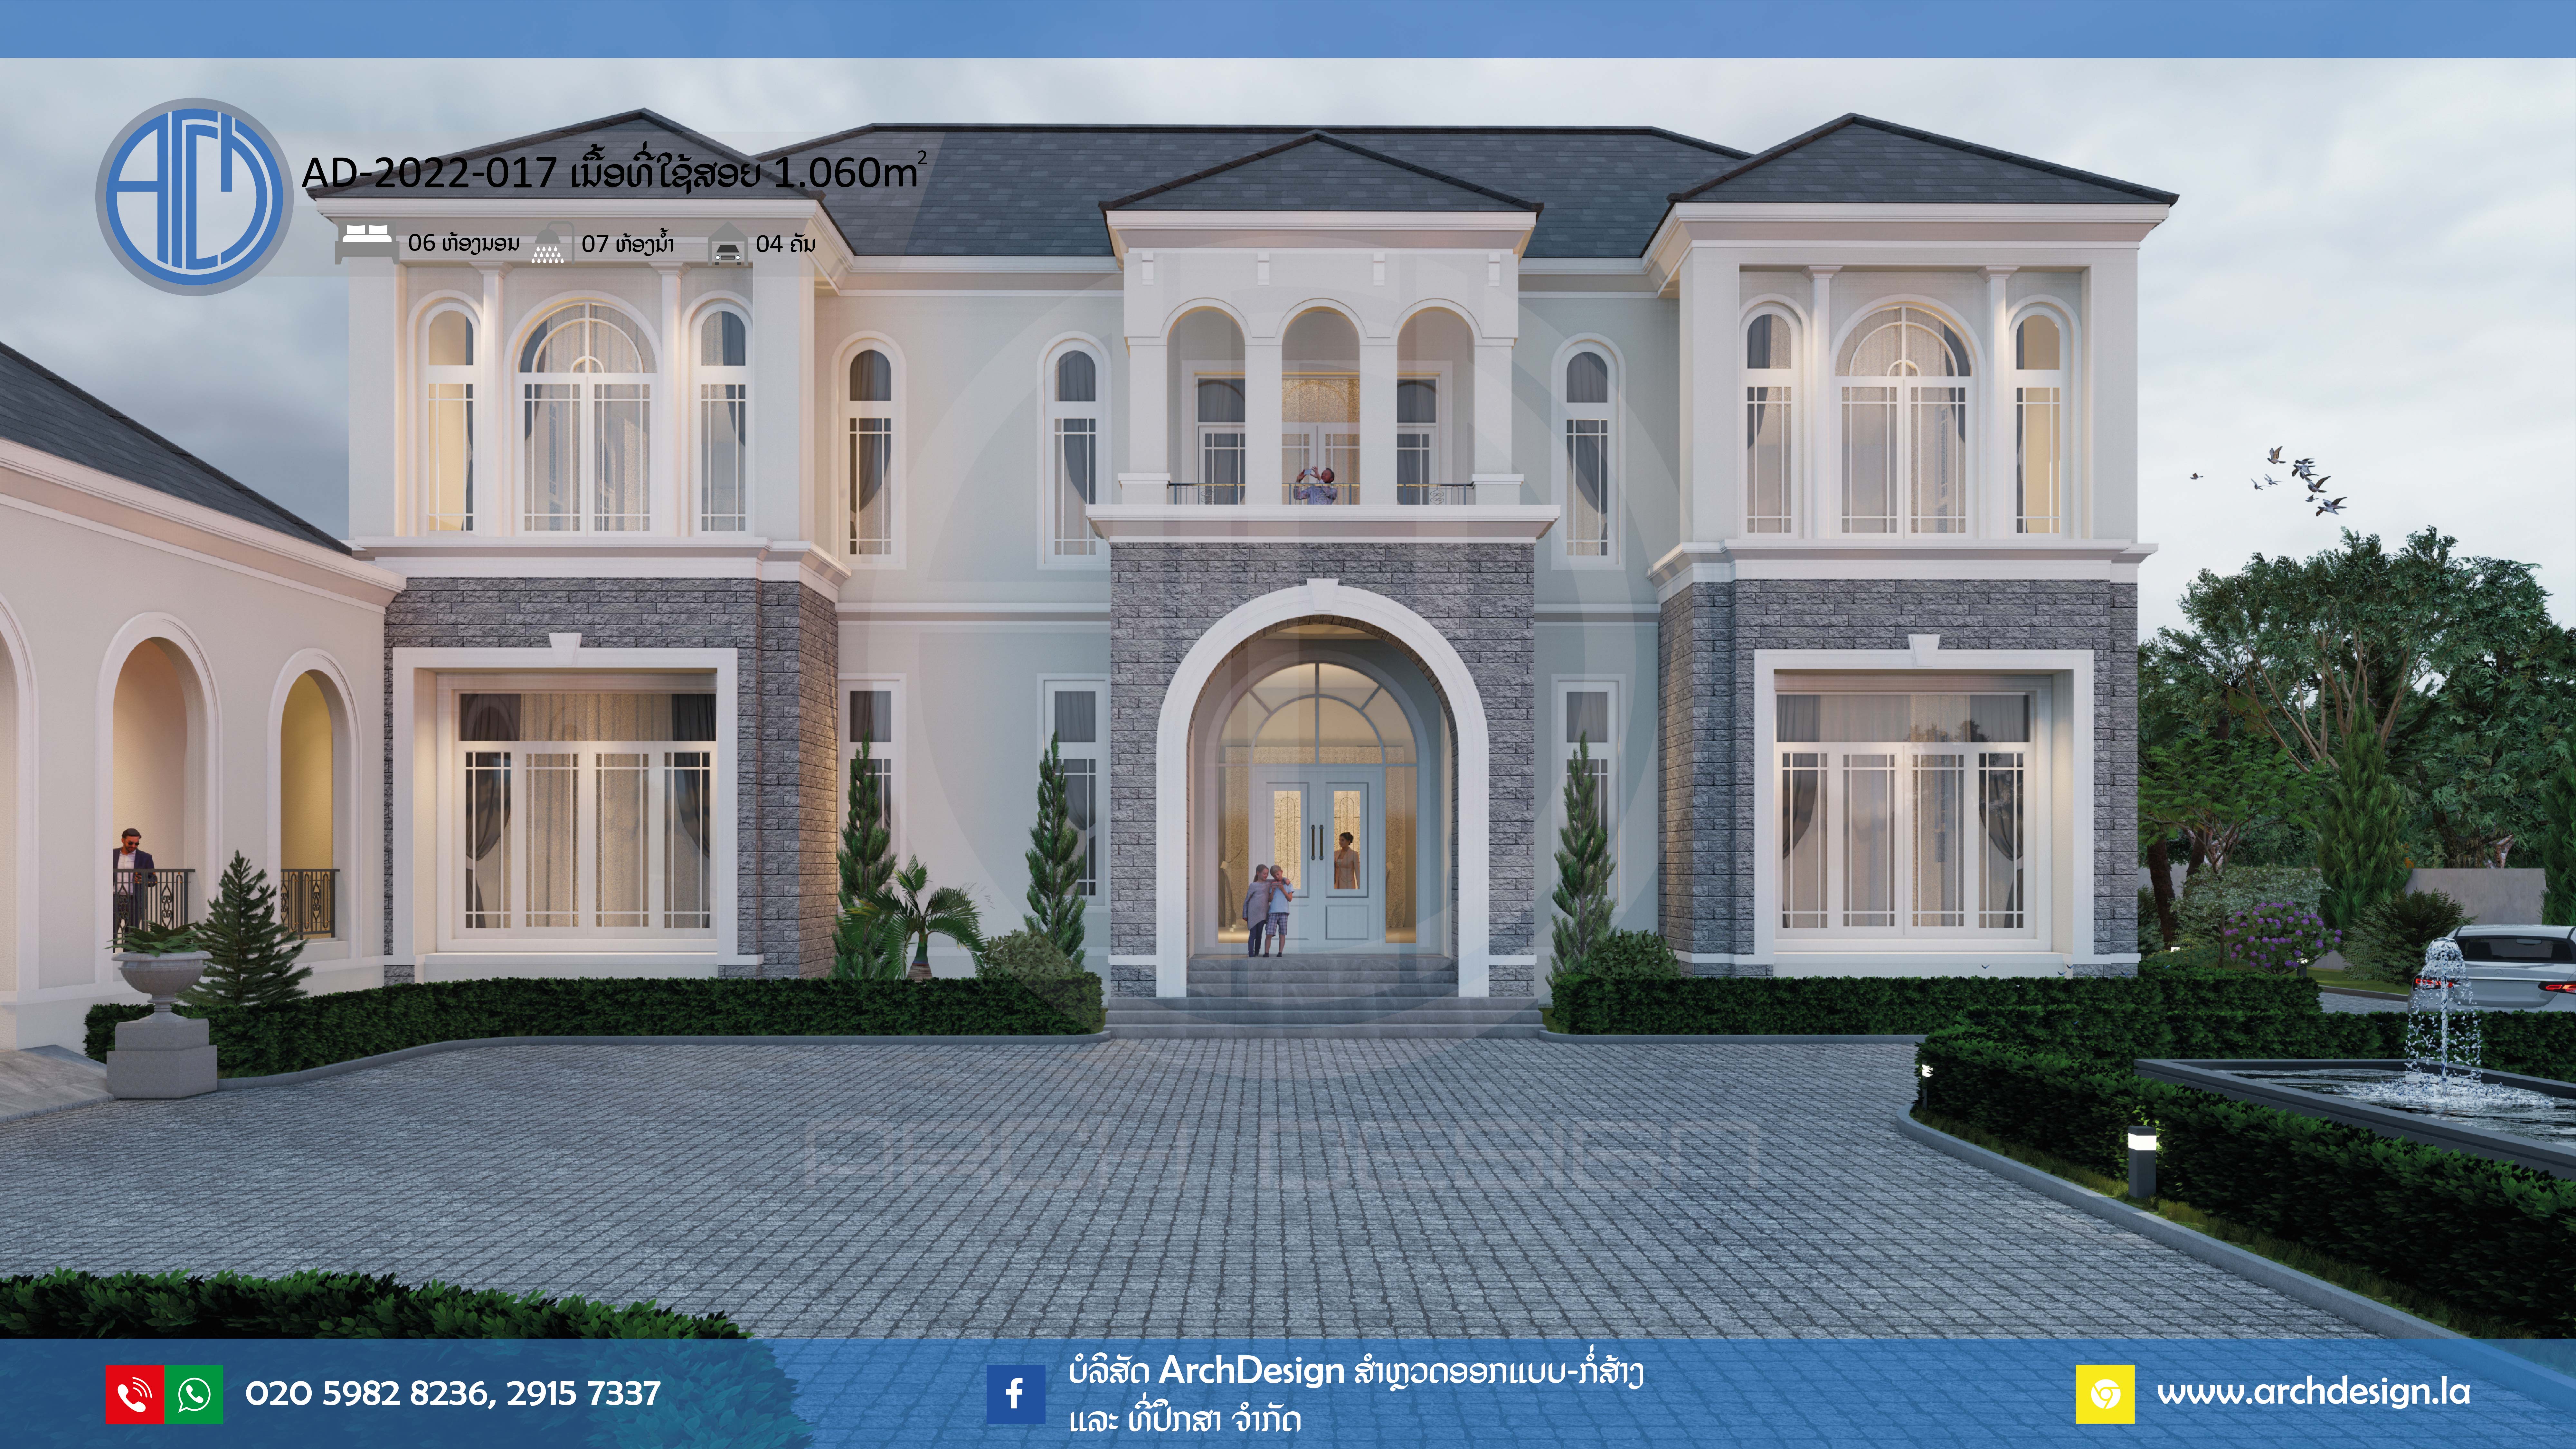 Two-storey house. AD-2022-017